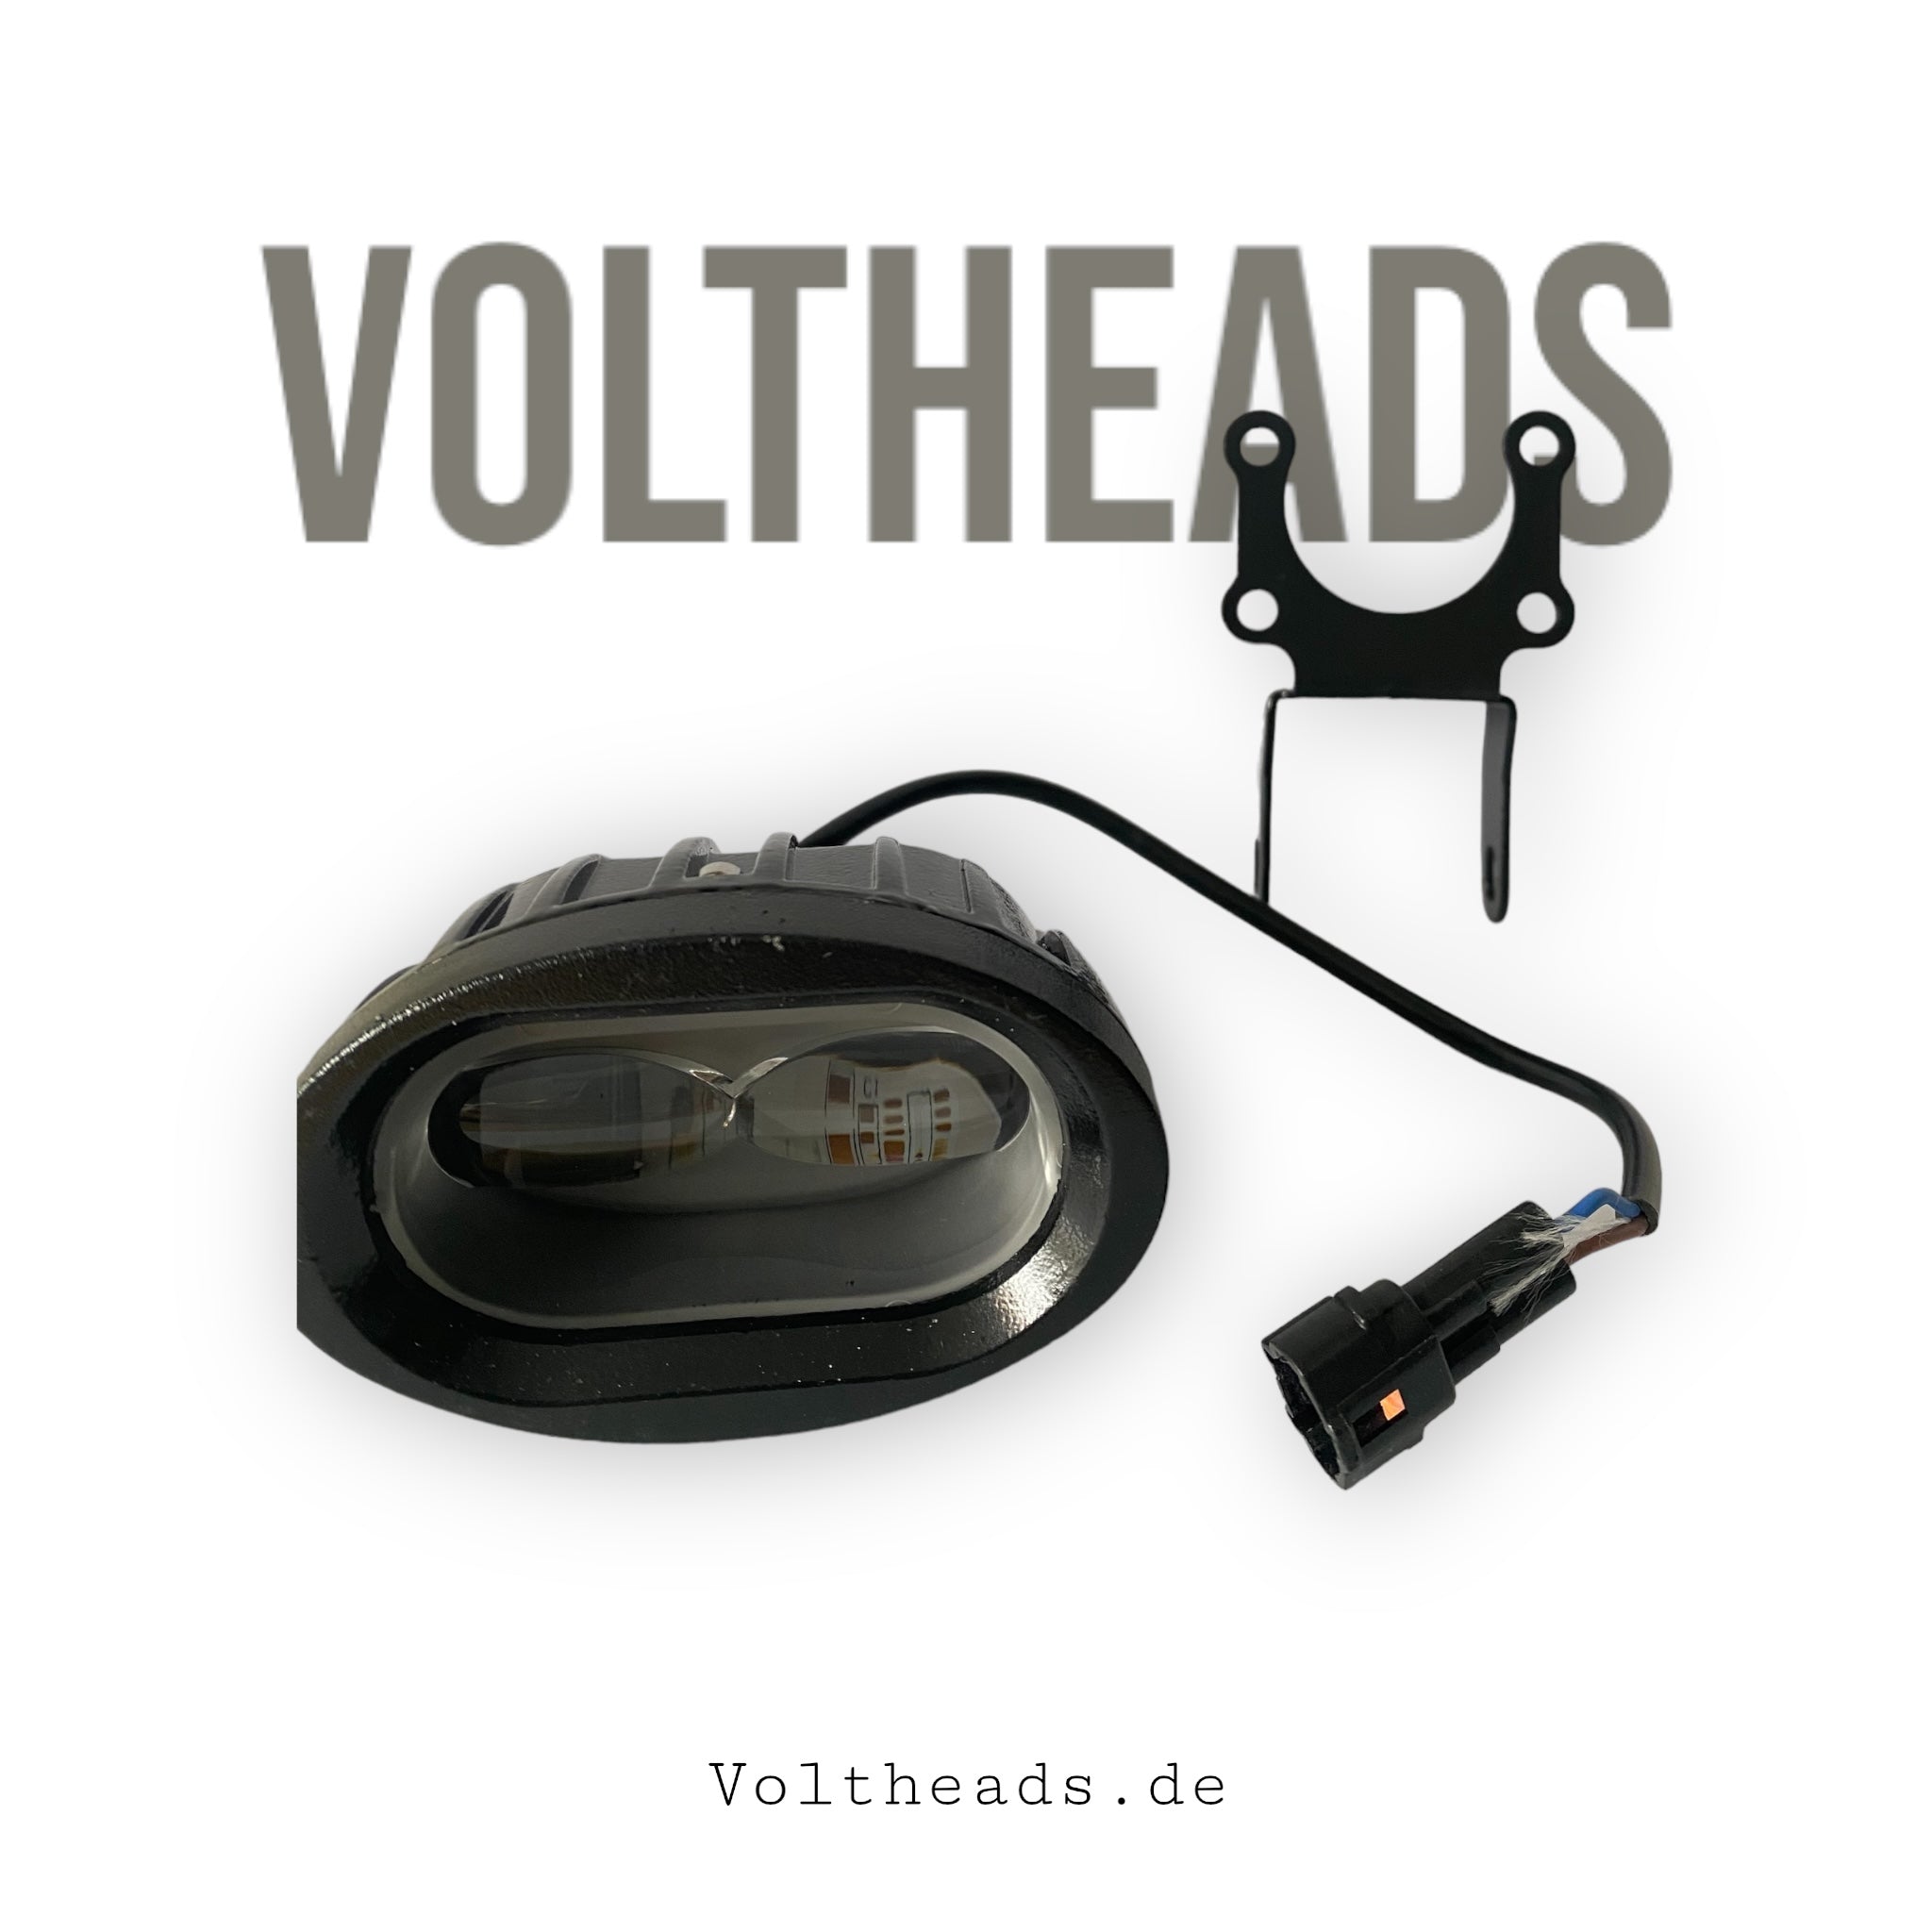 Voltheads